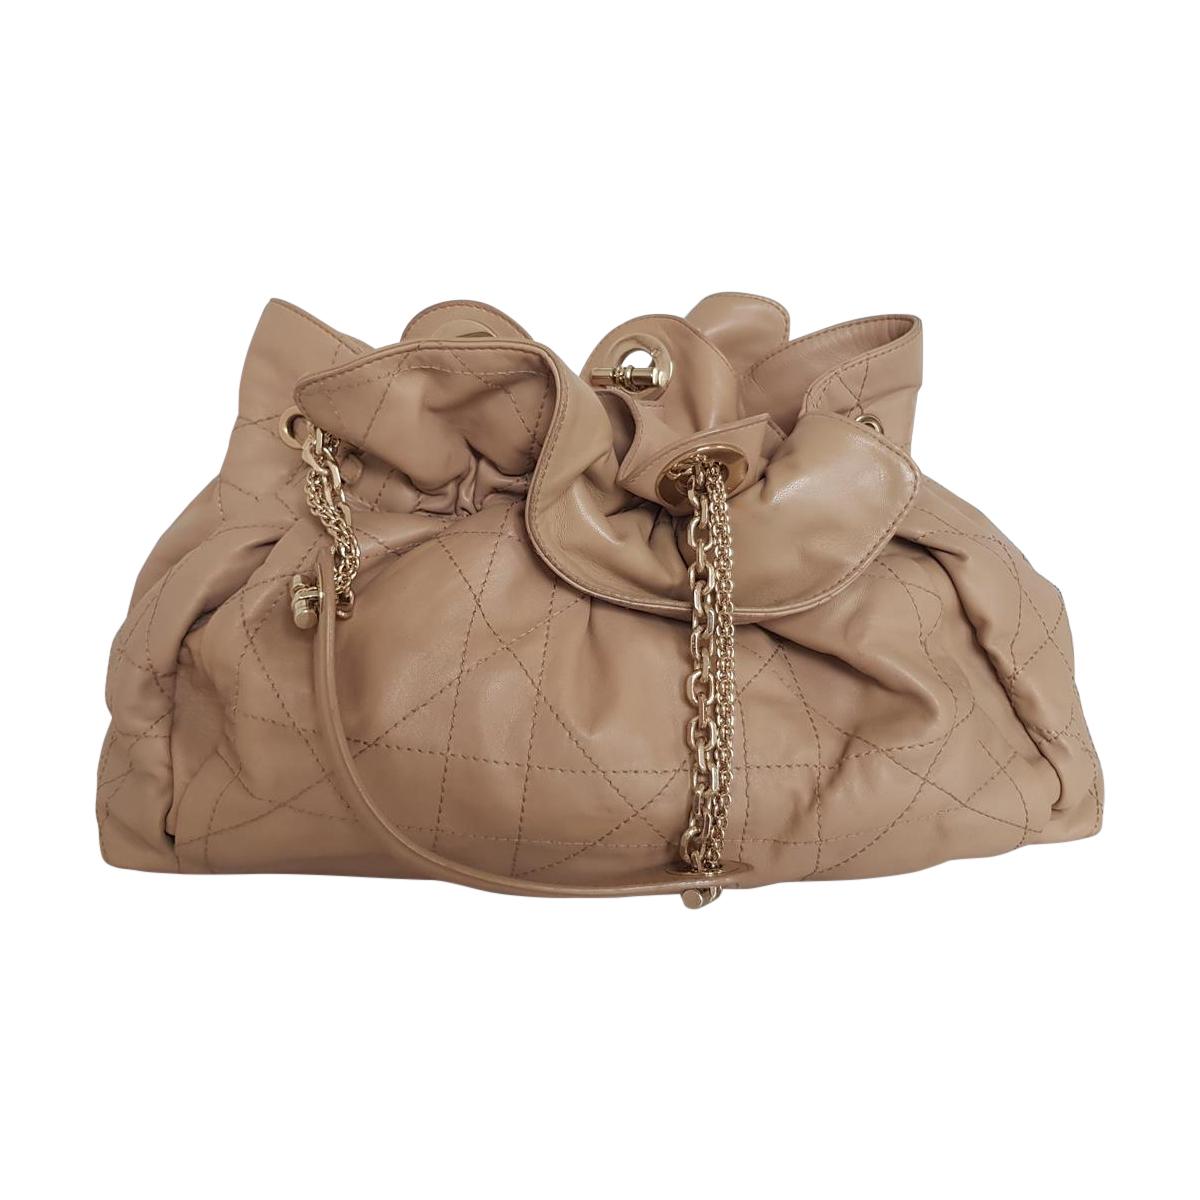 Beautiful Dior bag
Very soft leather, nappa
Beige color
Rouches
Handles with golden chains
An internal zip pocket
Cm 41 x 22 x 14 (16.1 x 8.7 x 5.5 inches)
Internal stain as in the photo
Worldwide express shipping included in the price !